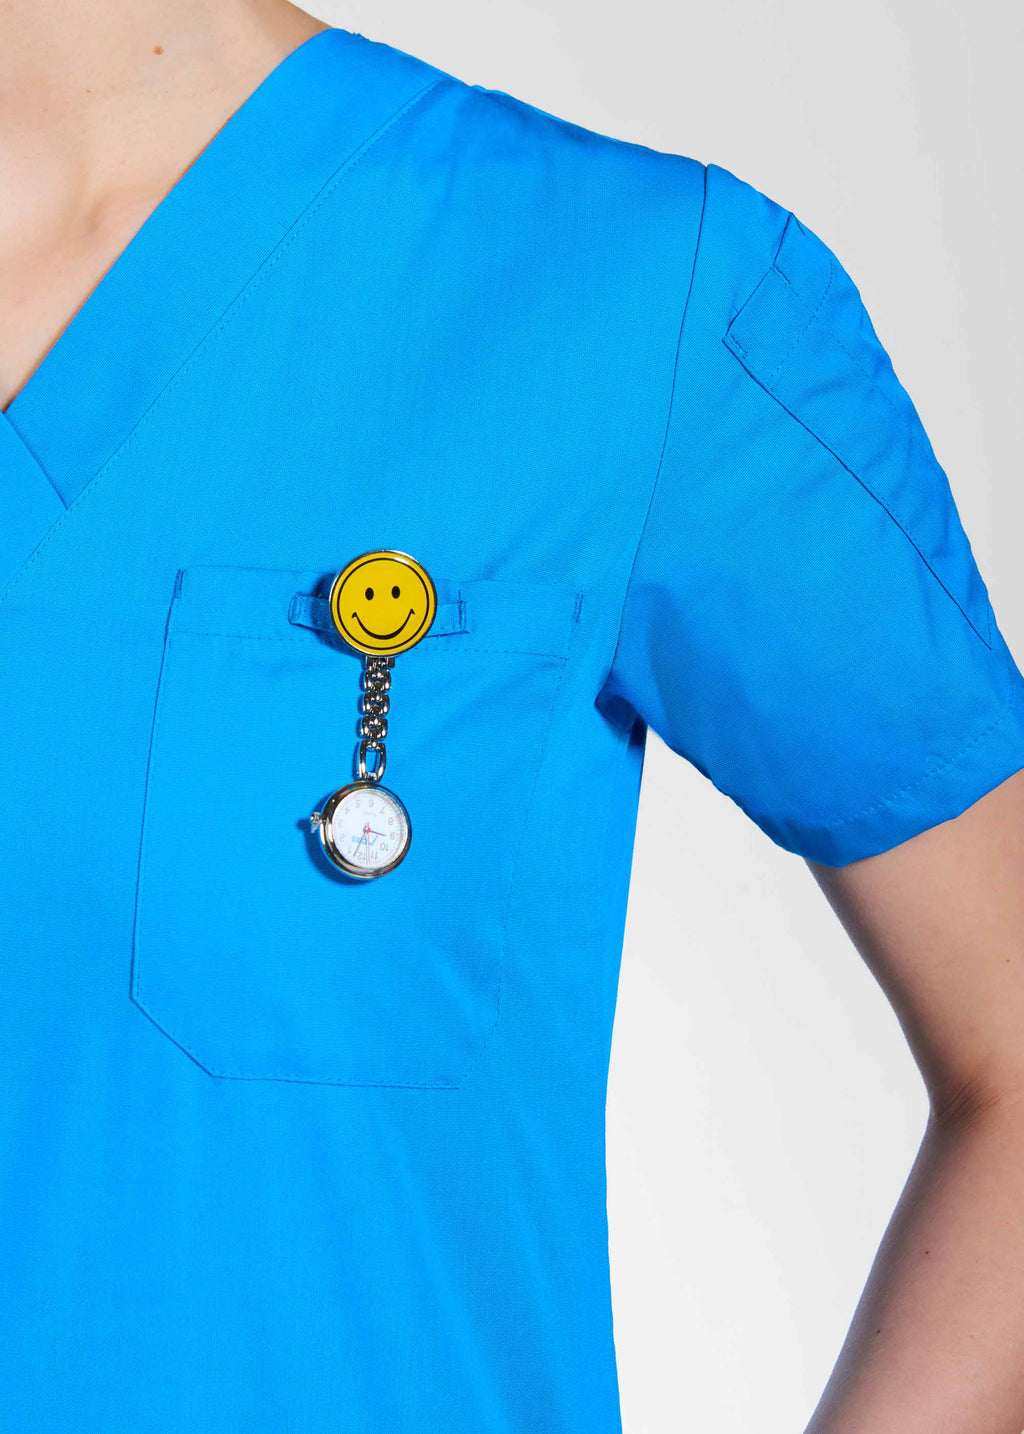 Product - V-Neck Solid MOBB Scrub Top